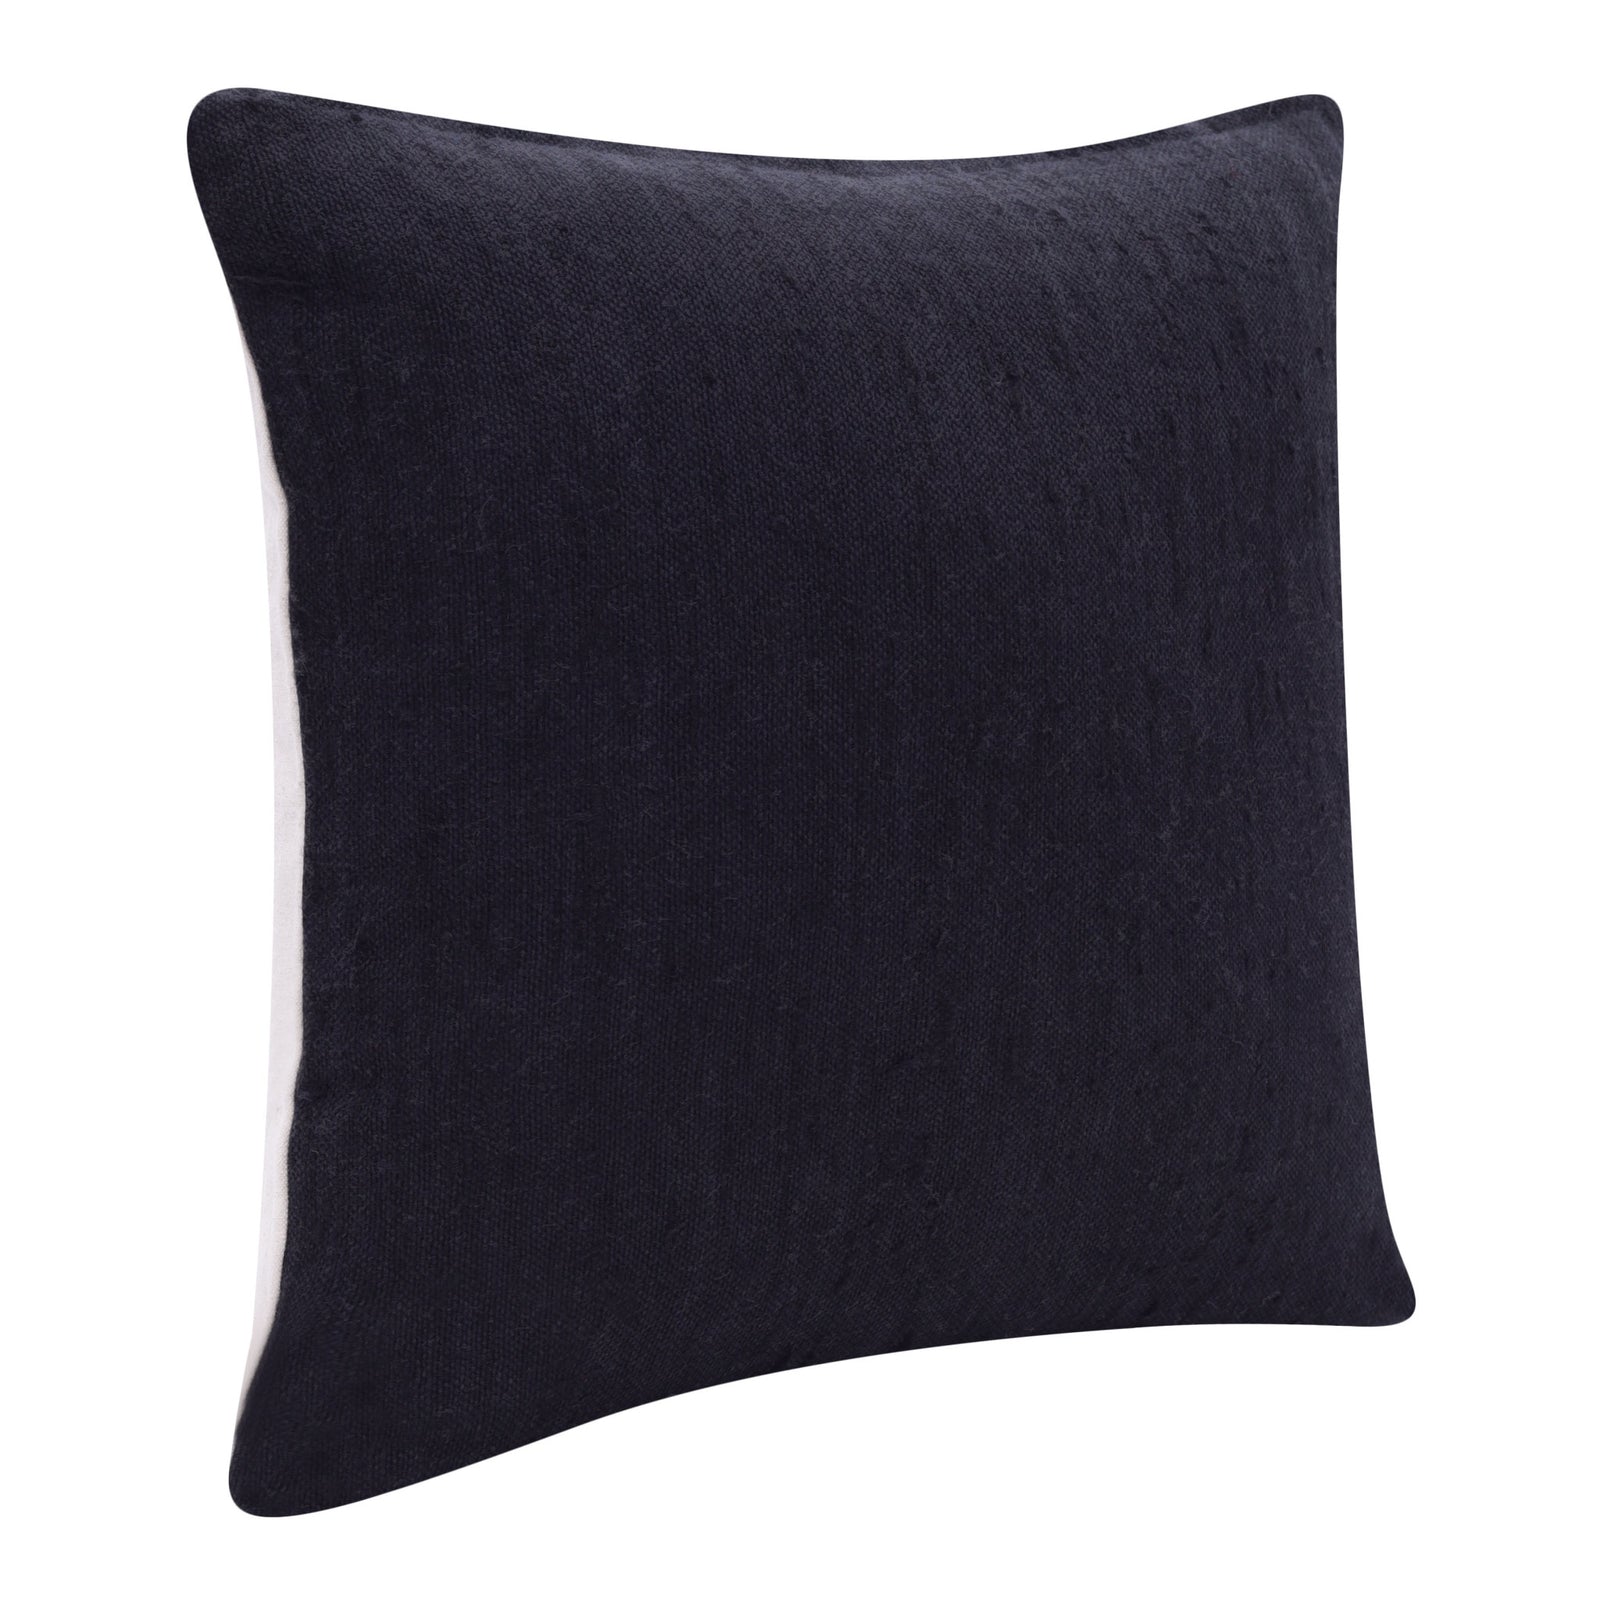 Black Solid Color Zippered Linen Throw Pillow Set Of Two - 20" x 20"